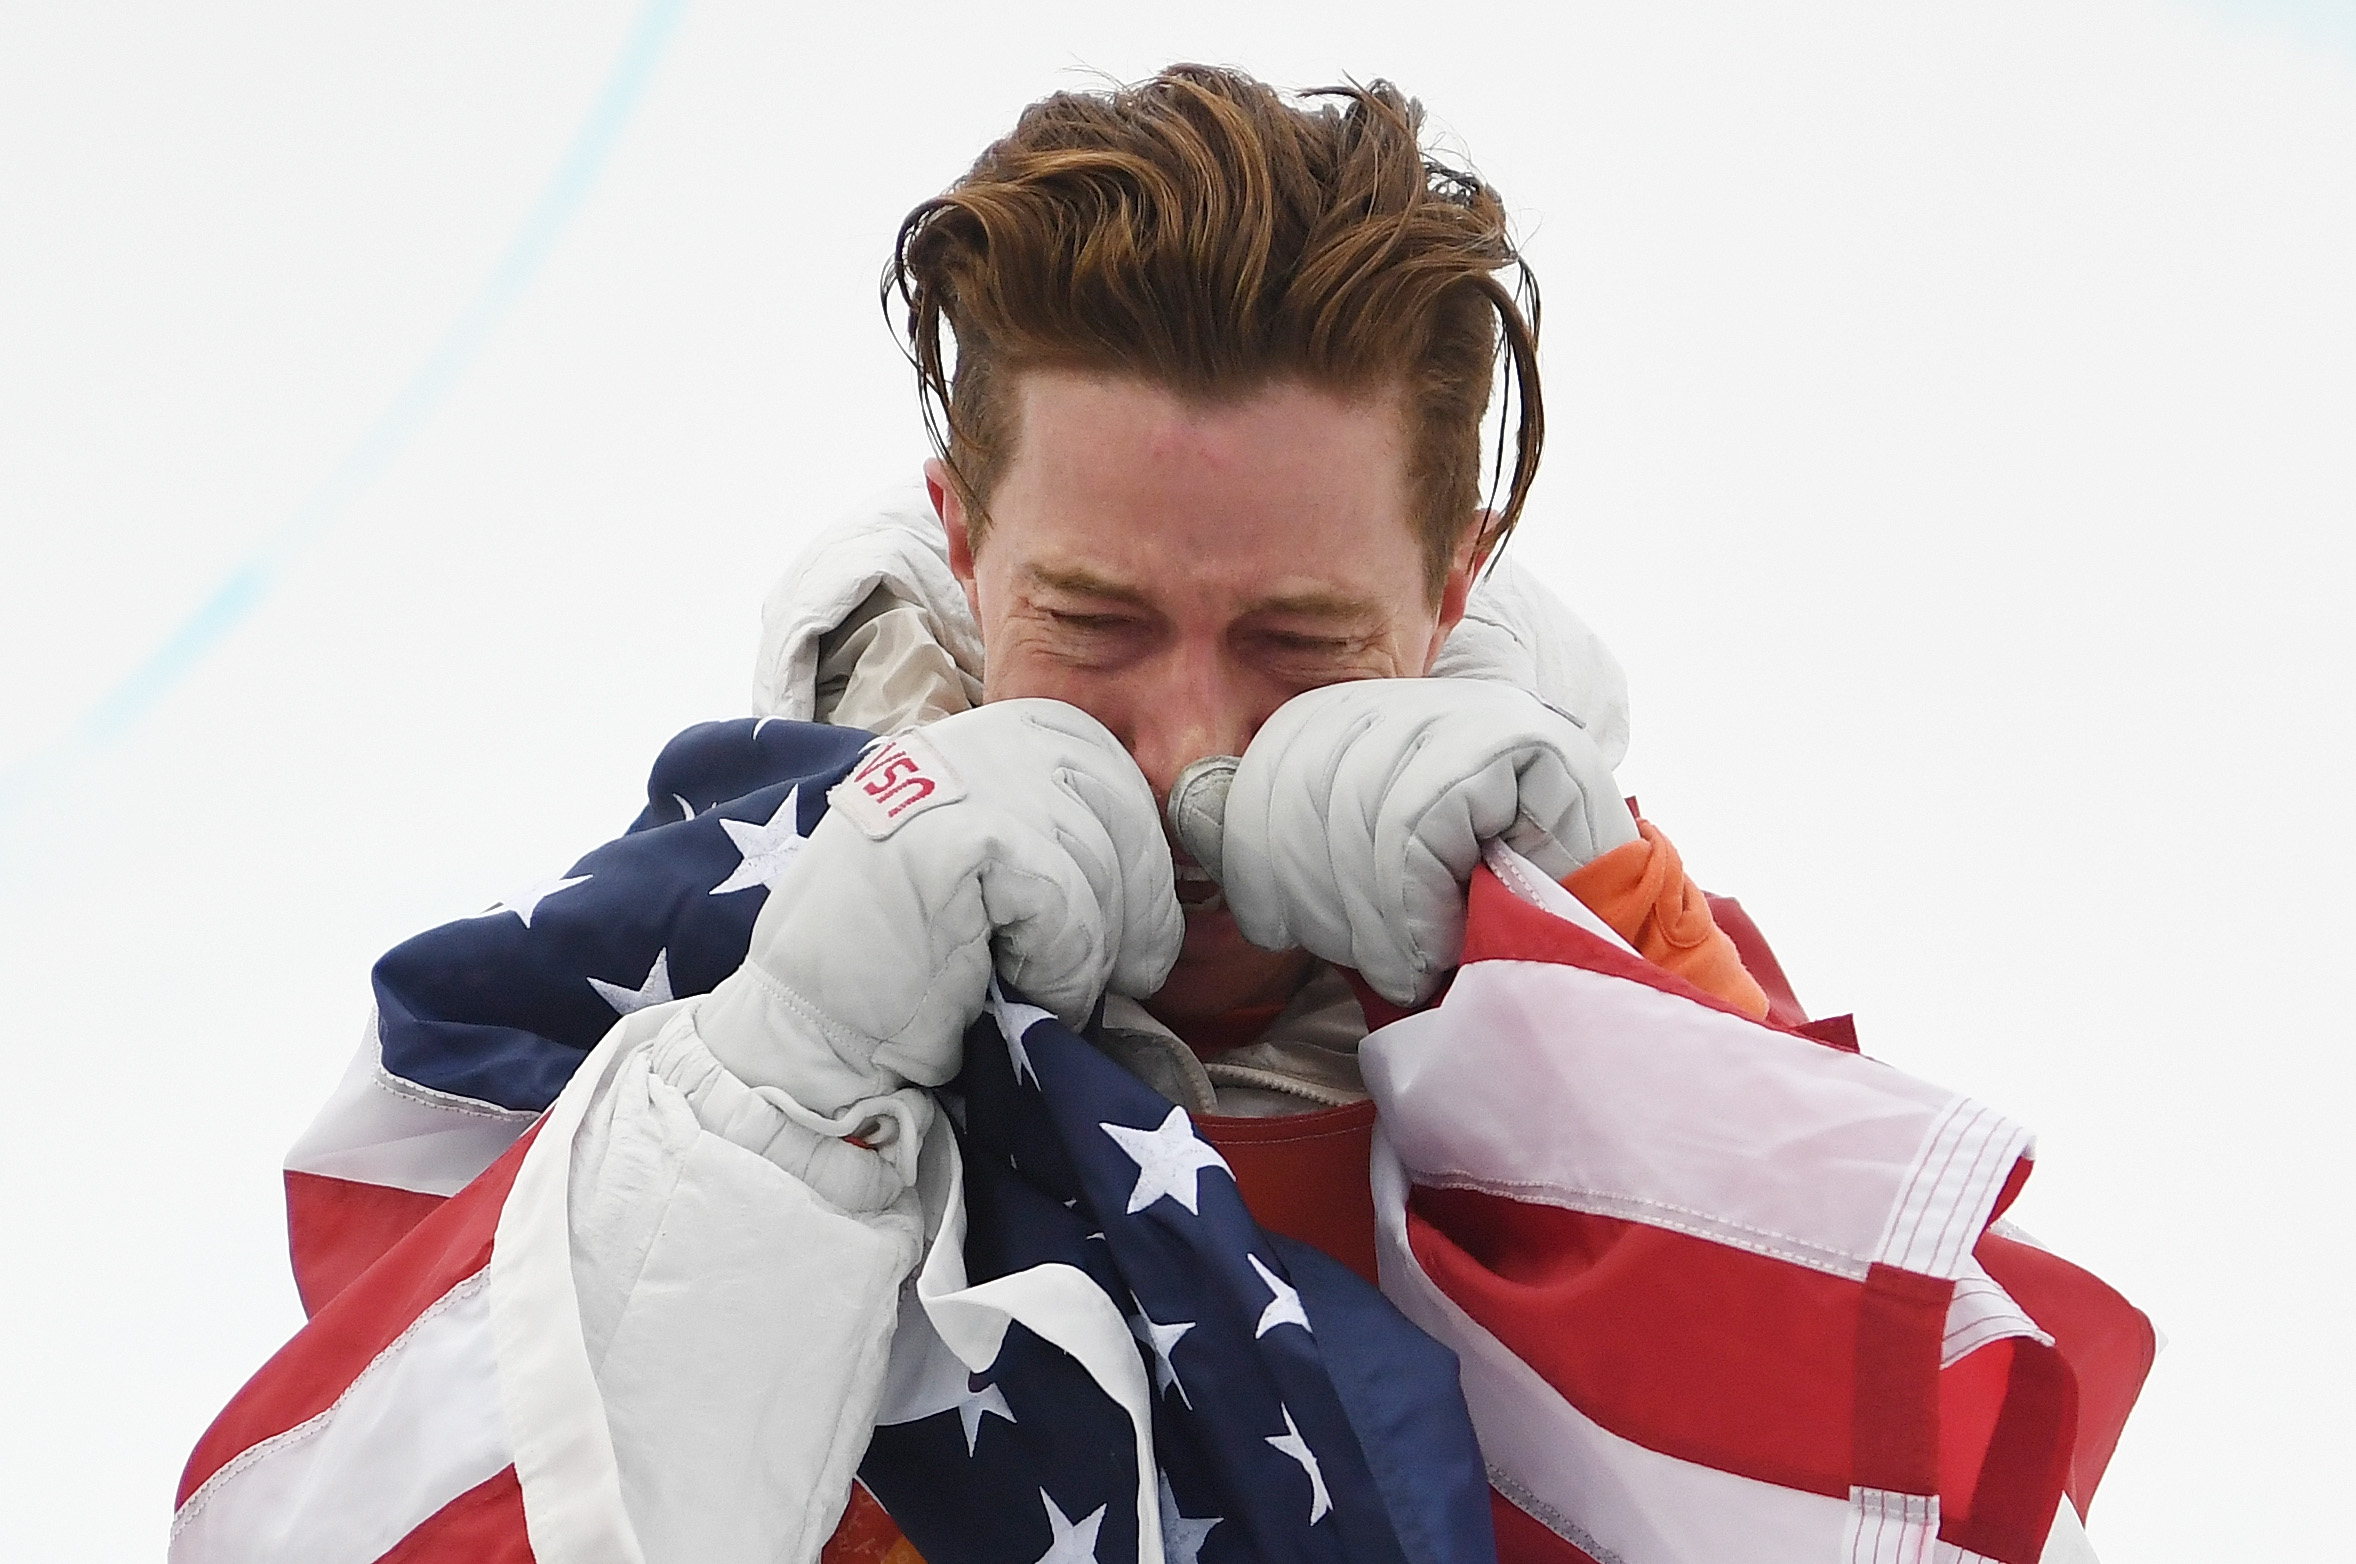 From Torino to Pyeongchang, Watch All Three of Shaun White's Gold